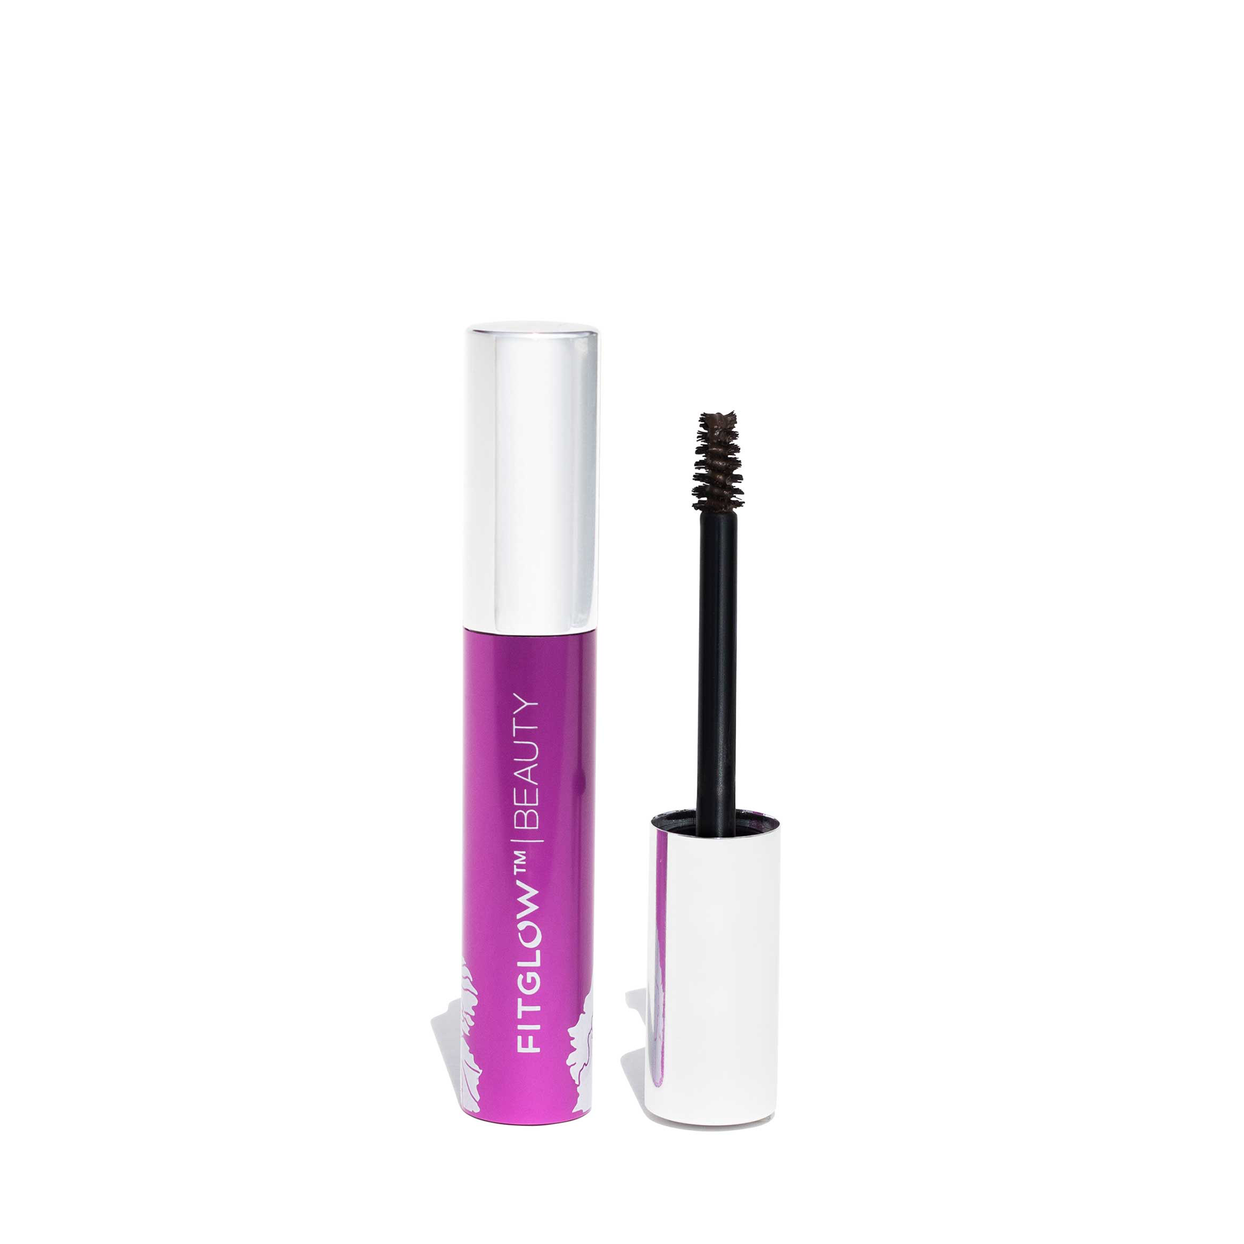 Protein Brow Gel